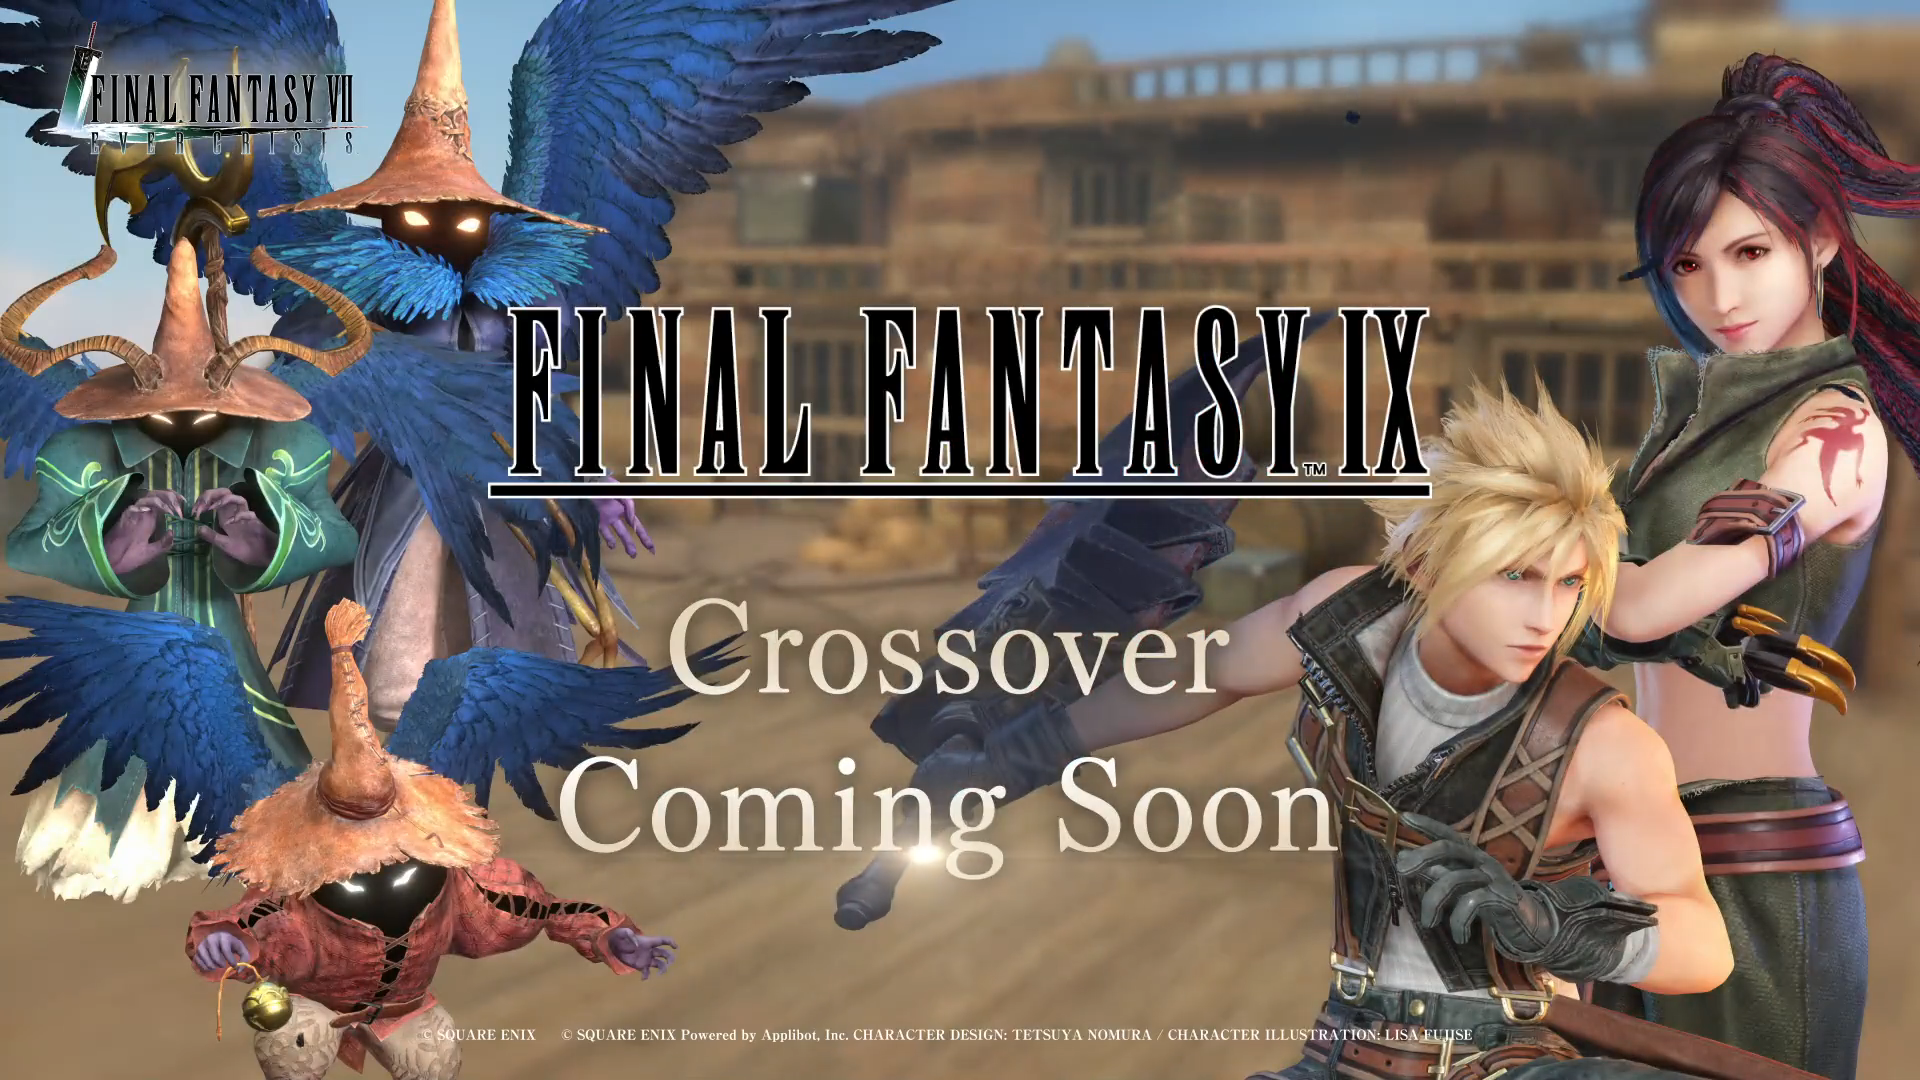 A Final Fantasy collab might be coming to the game soon (via